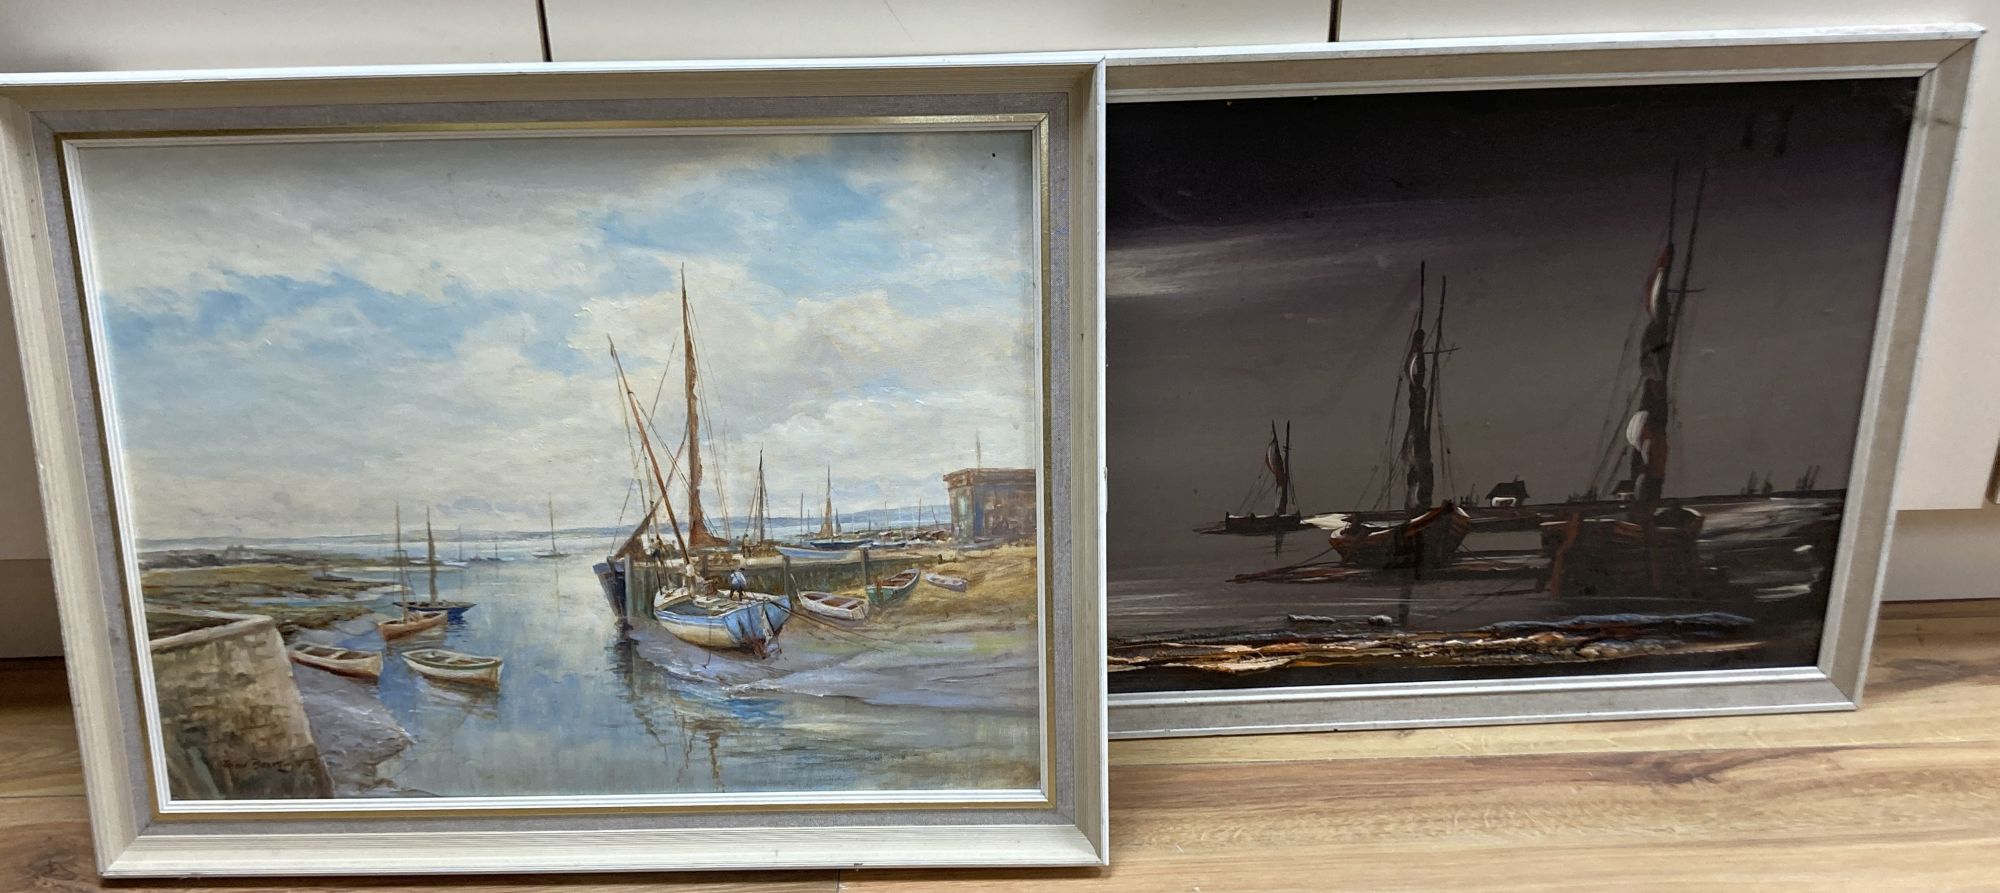 John Brangwyn, oil on board, Keyhaven, signed, 44 x 59cm, together with a 1970s oil, Estuary scene, 44 cx 113cm